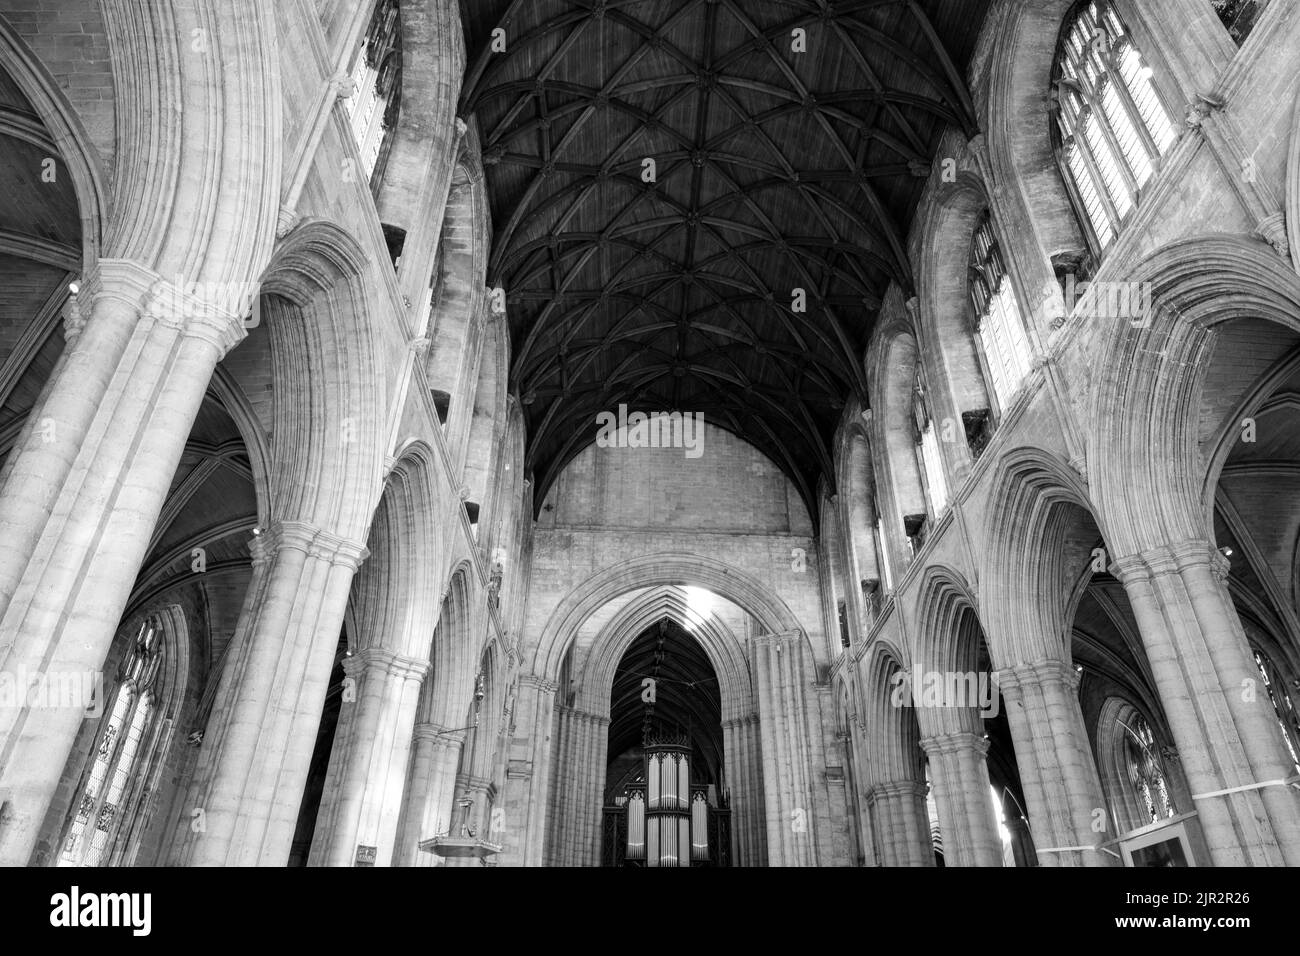 The Cathedral Church of St Peter and St Wilfrid - Ripon Cathedral - Ripon, North Yorkshire, England, UK - interior view Stock Photo